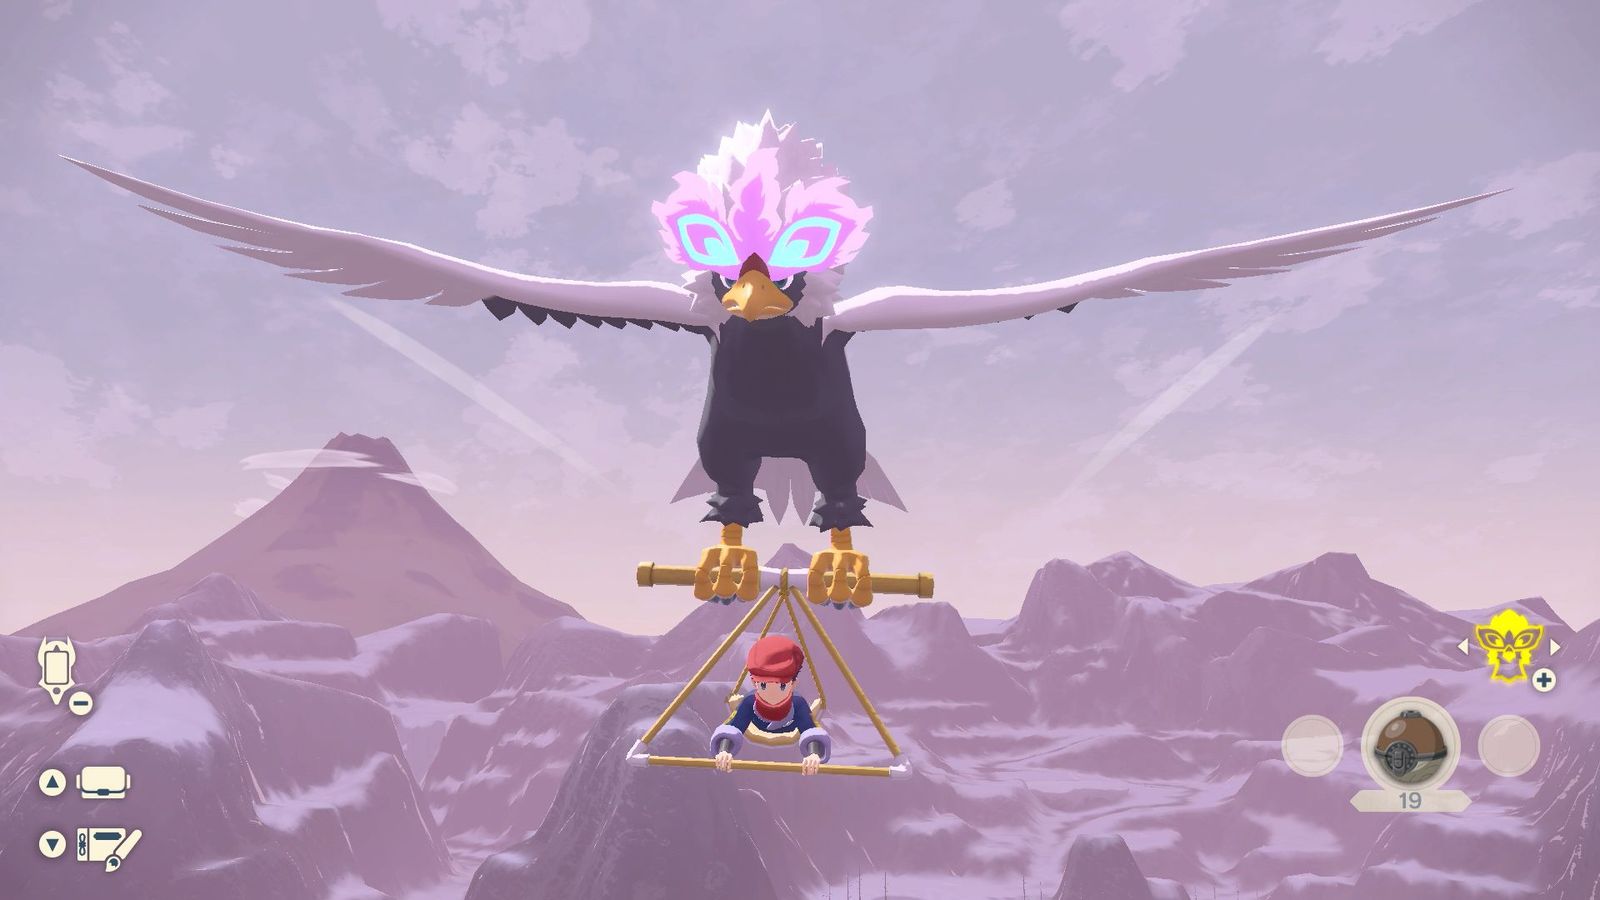 A player flying with Hisuian Braviary in Alabaster Icelands of Pokemon Legends: Arceus.